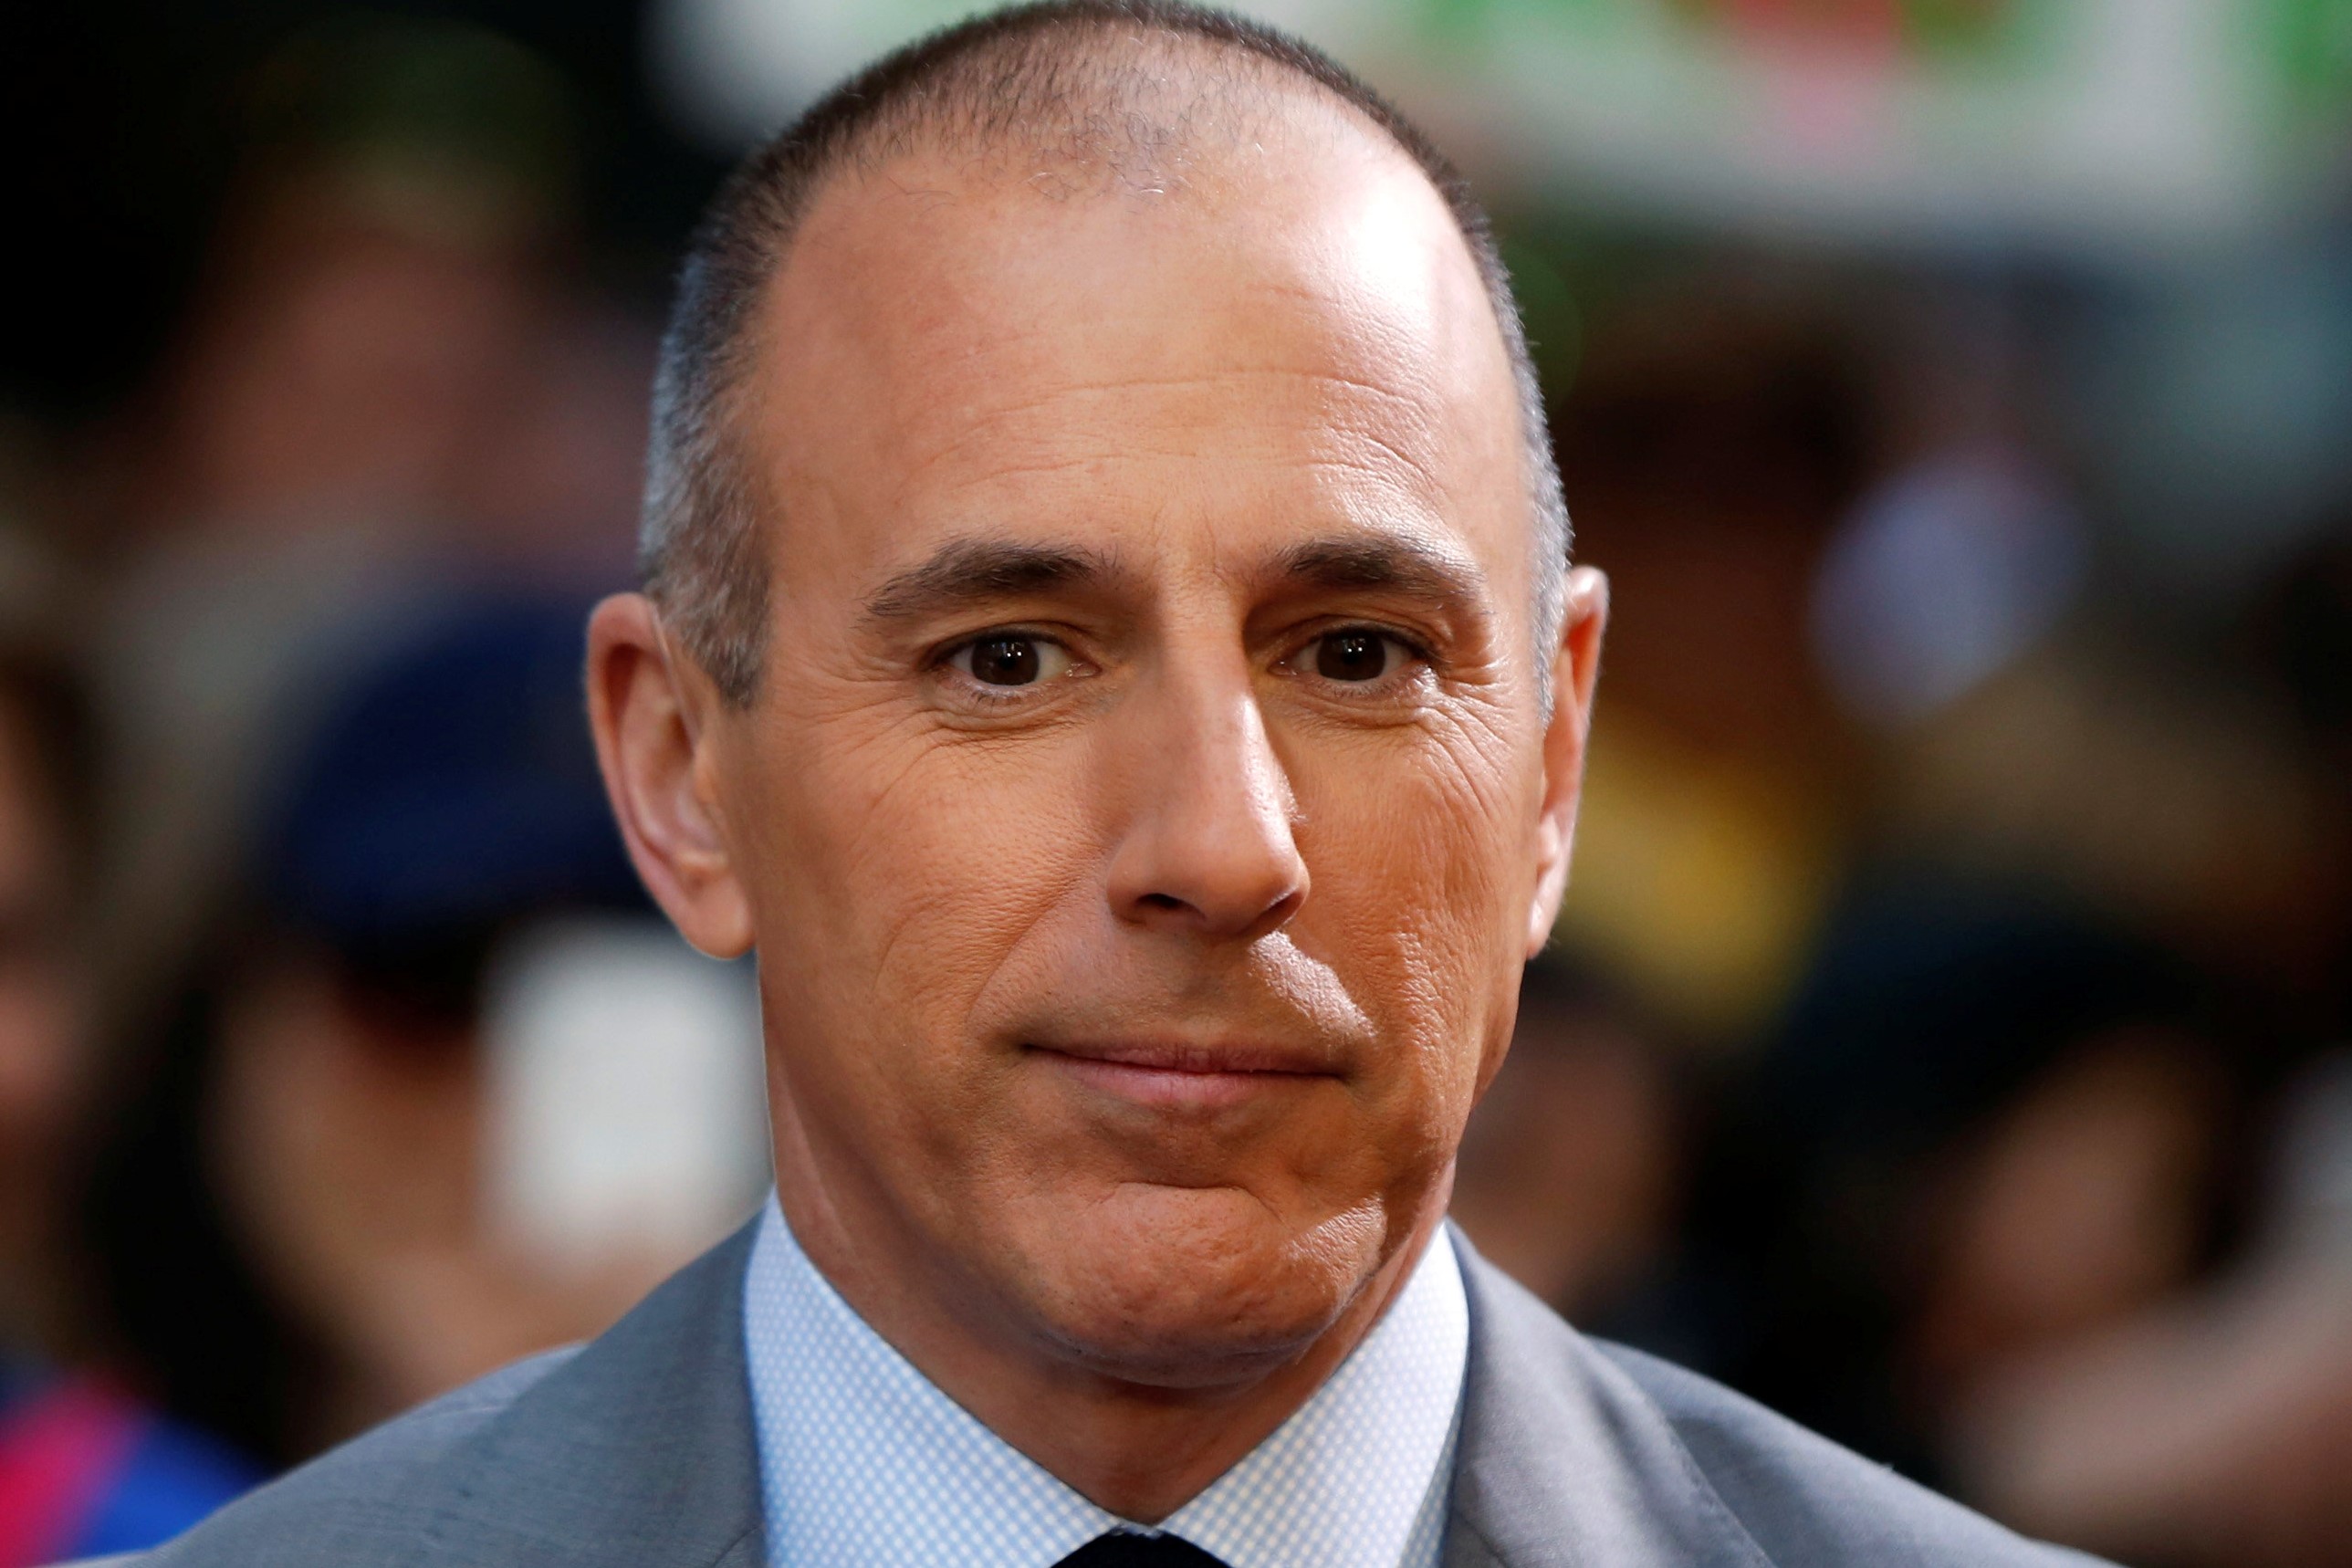 Host Matt Lauer pauses during a break while filming NBC's 'Today' show at Rockefeller Center in New York, May 3, 2013. u00e2u20acu201d Reuters pic